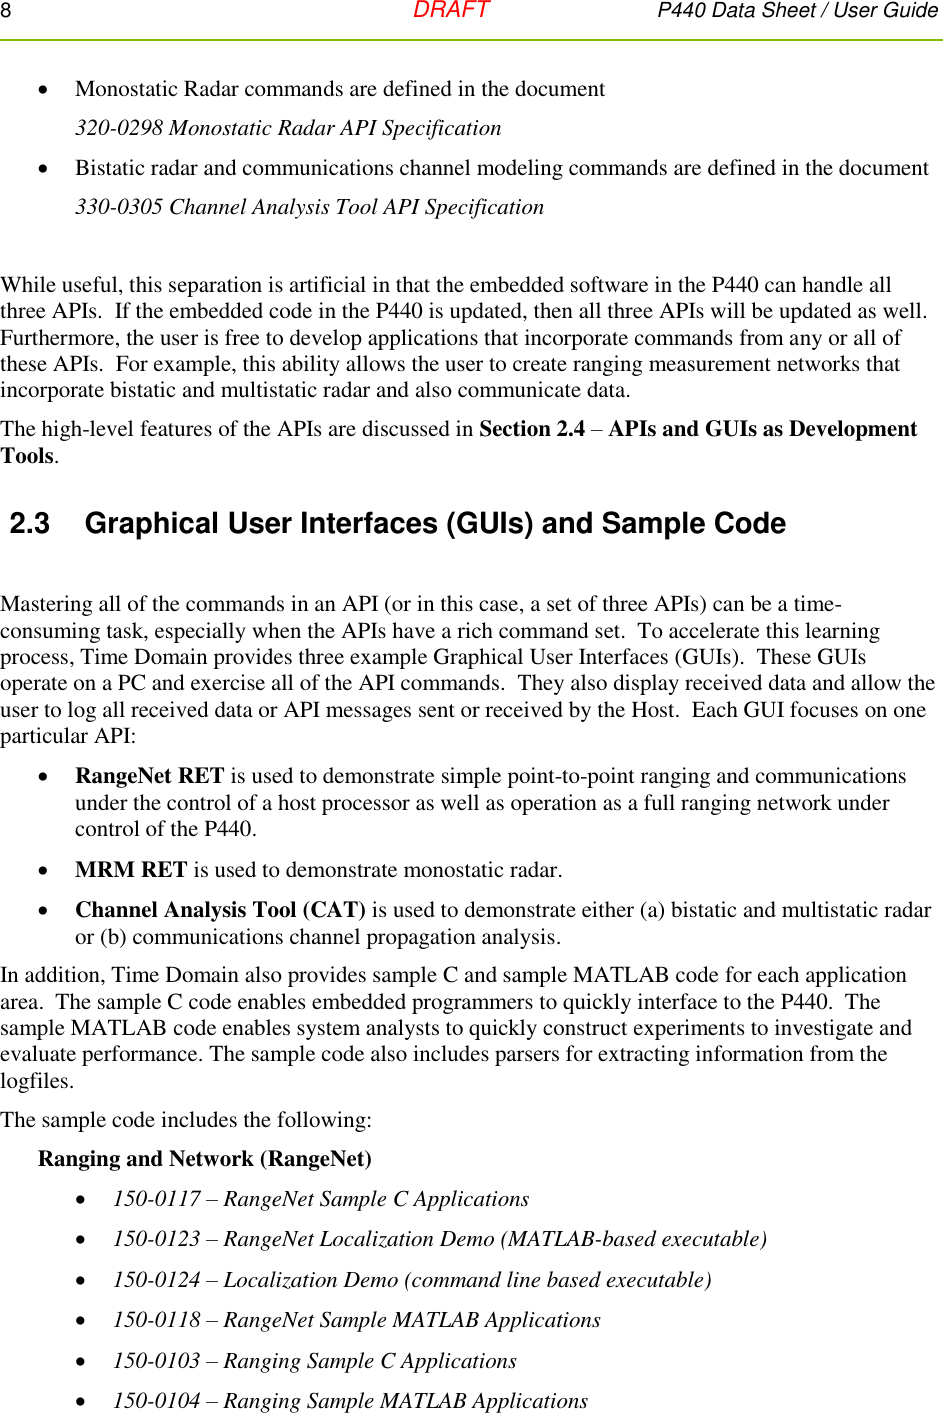 8   DRAFT P440 Data Sheet / User Guide   Monostatic Radar commands are defined in the document  320-0298 Monostatic Radar API Specification  Bistatic radar and communications channel modeling commands are defined in the document  330-0305 Channel Analysis Tool API Specification  While useful, this separation is artificial in that the embedded software in the P440 can handle all three APIs.  If the embedded code in the P440 is updated, then all three APIs will be updated as well.  Furthermore, the user is free to develop applications that incorporate commands from any or all of these APIs.  For example, this ability allows the user to create ranging measurement networks that incorporate bistatic and multistatic radar and also communicate data. The high-level features of the APIs are discussed in Section 2.4 – APIs and GUIs as Development Tools. 2.3  Graphical User Interfaces (GUIs) and Sample Code  Mastering all of the commands in an API (or in this case, a set of three APIs) can be a time-consuming task, especially when the APIs have a rich command set.  To accelerate this learning process, Time Domain provides three example Graphical User Interfaces (GUIs).  These GUIs operate on a PC and exercise all of the API commands.  They also display received data and allow the user to log all received data or API messages sent or received by the Host.  Each GUI focuses on one particular API:  RangeNet RET is used to demonstrate simple point-to-point ranging and communications under the control of a host processor as well as operation as a full ranging network under control of the P440.  MRM RET is used to demonstrate monostatic radar.  Channel Analysis Tool (CAT) is used to demonstrate either (a) bistatic and multistatic radar or (b) communications channel propagation analysis.  In addition, Time Domain also provides sample C and sample MATLAB code for each application area.  The sample C code enables embedded programmers to quickly interface to the P440.  The sample MATLAB code enables system analysts to quickly construct experiments to investigate and evaluate performance. The sample code also includes parsers for extracting information from the logfiles.   The sample code includes the following: Ranging and Network (RangeNet)  150-0117 – RangeNet Sample C Applications  150-0123 – RangeNet Localization Demo (MATLAB-based executable)  150-0124 – Localization Demo (command line based executable)  150-0118 – RangeNet Sample MATLAB Applications  150-0103 – Ranging Sample C Applications  150-0104 – Ranging Sample MATLAB Applications 